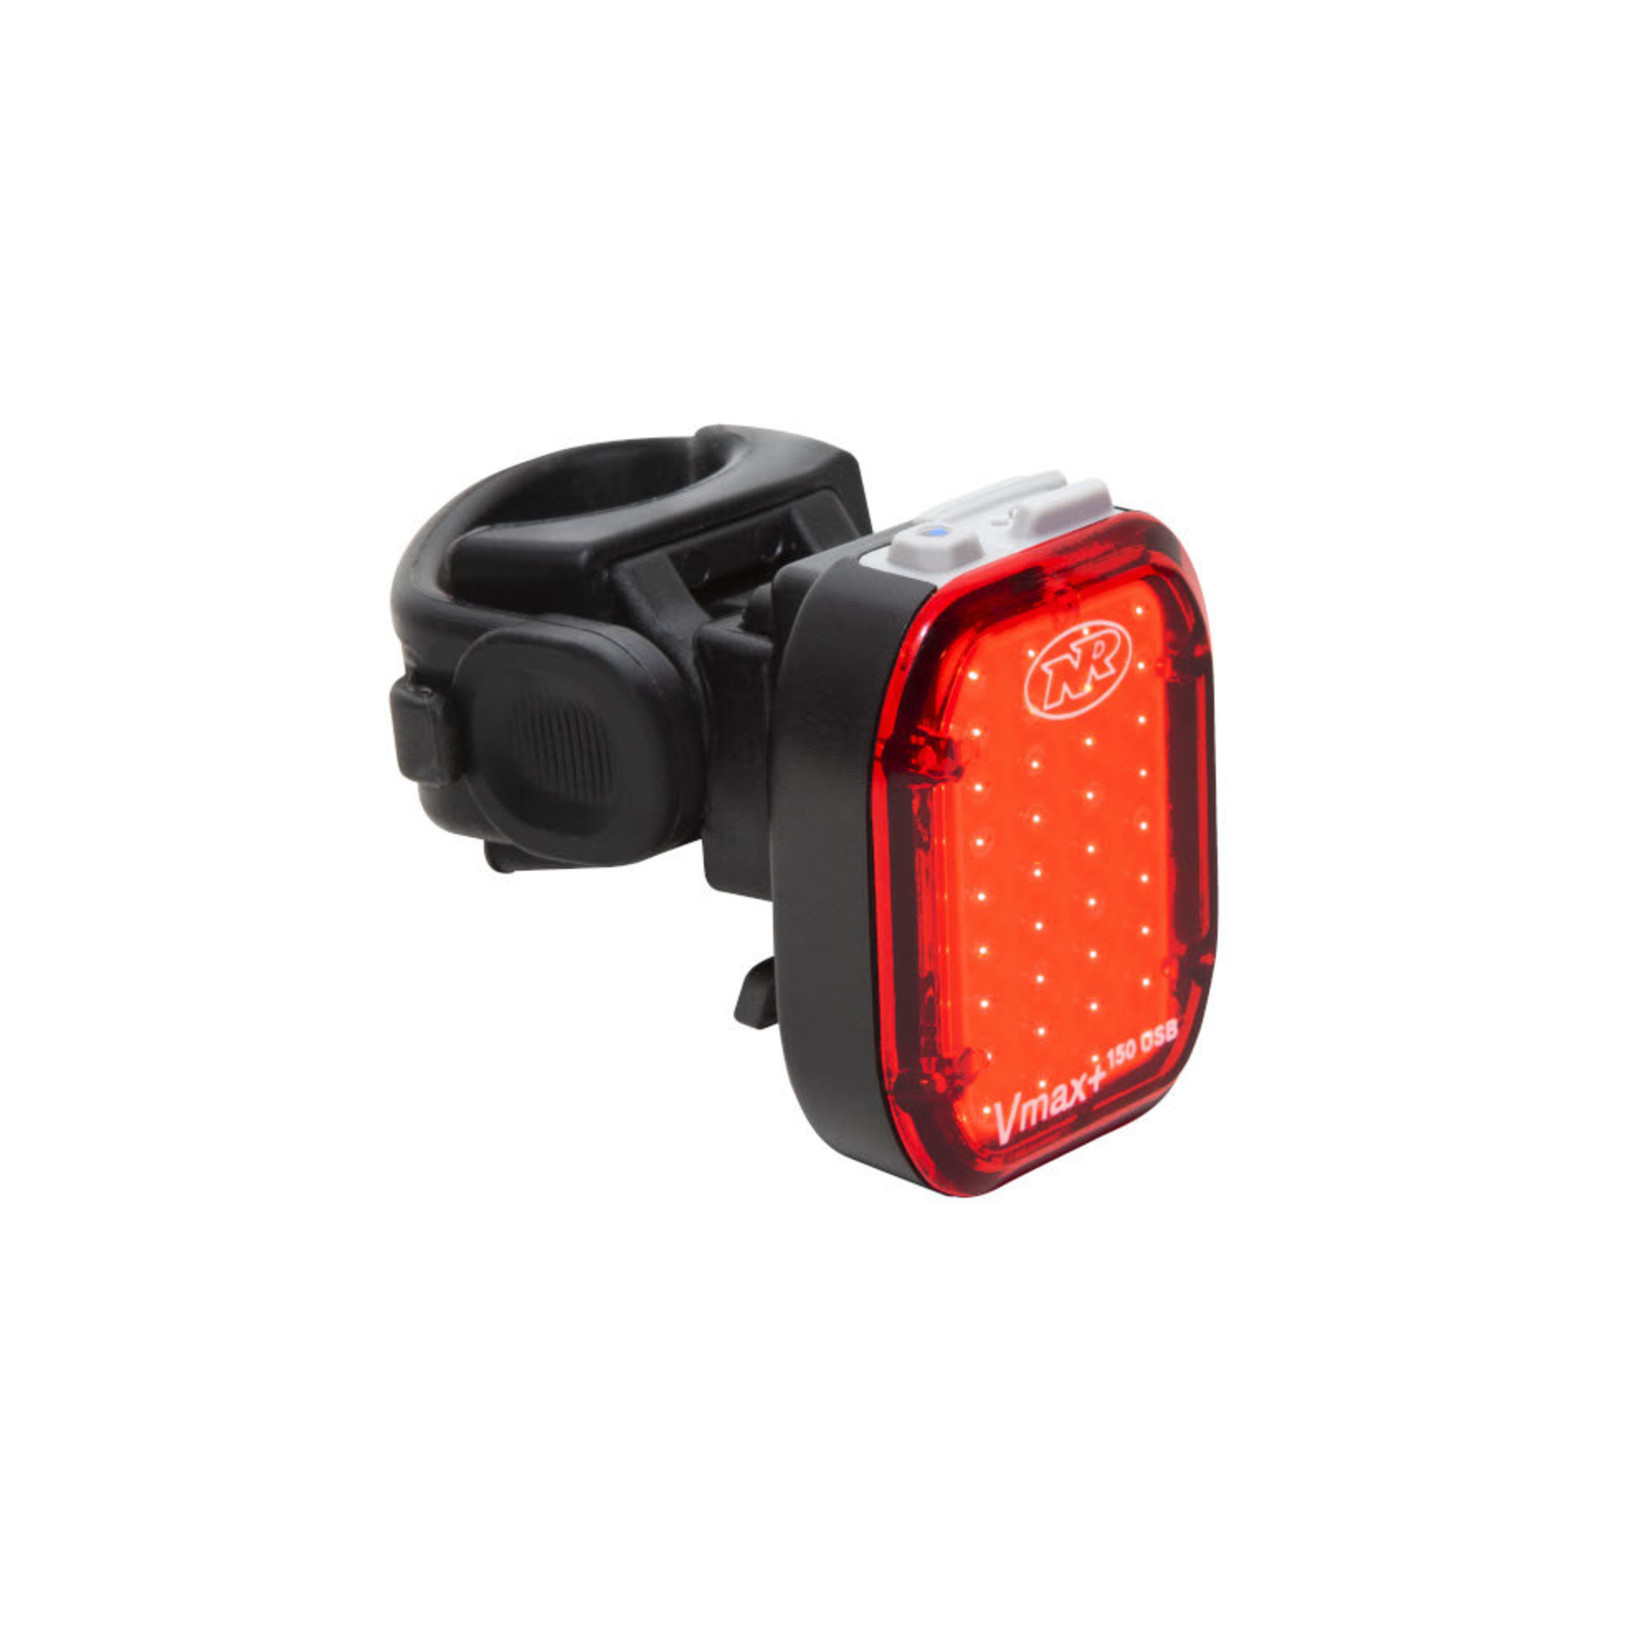 Nite Rider NiteRider VMAX 150+ LED Rechargeable Rear Light IP64 Water Resistant